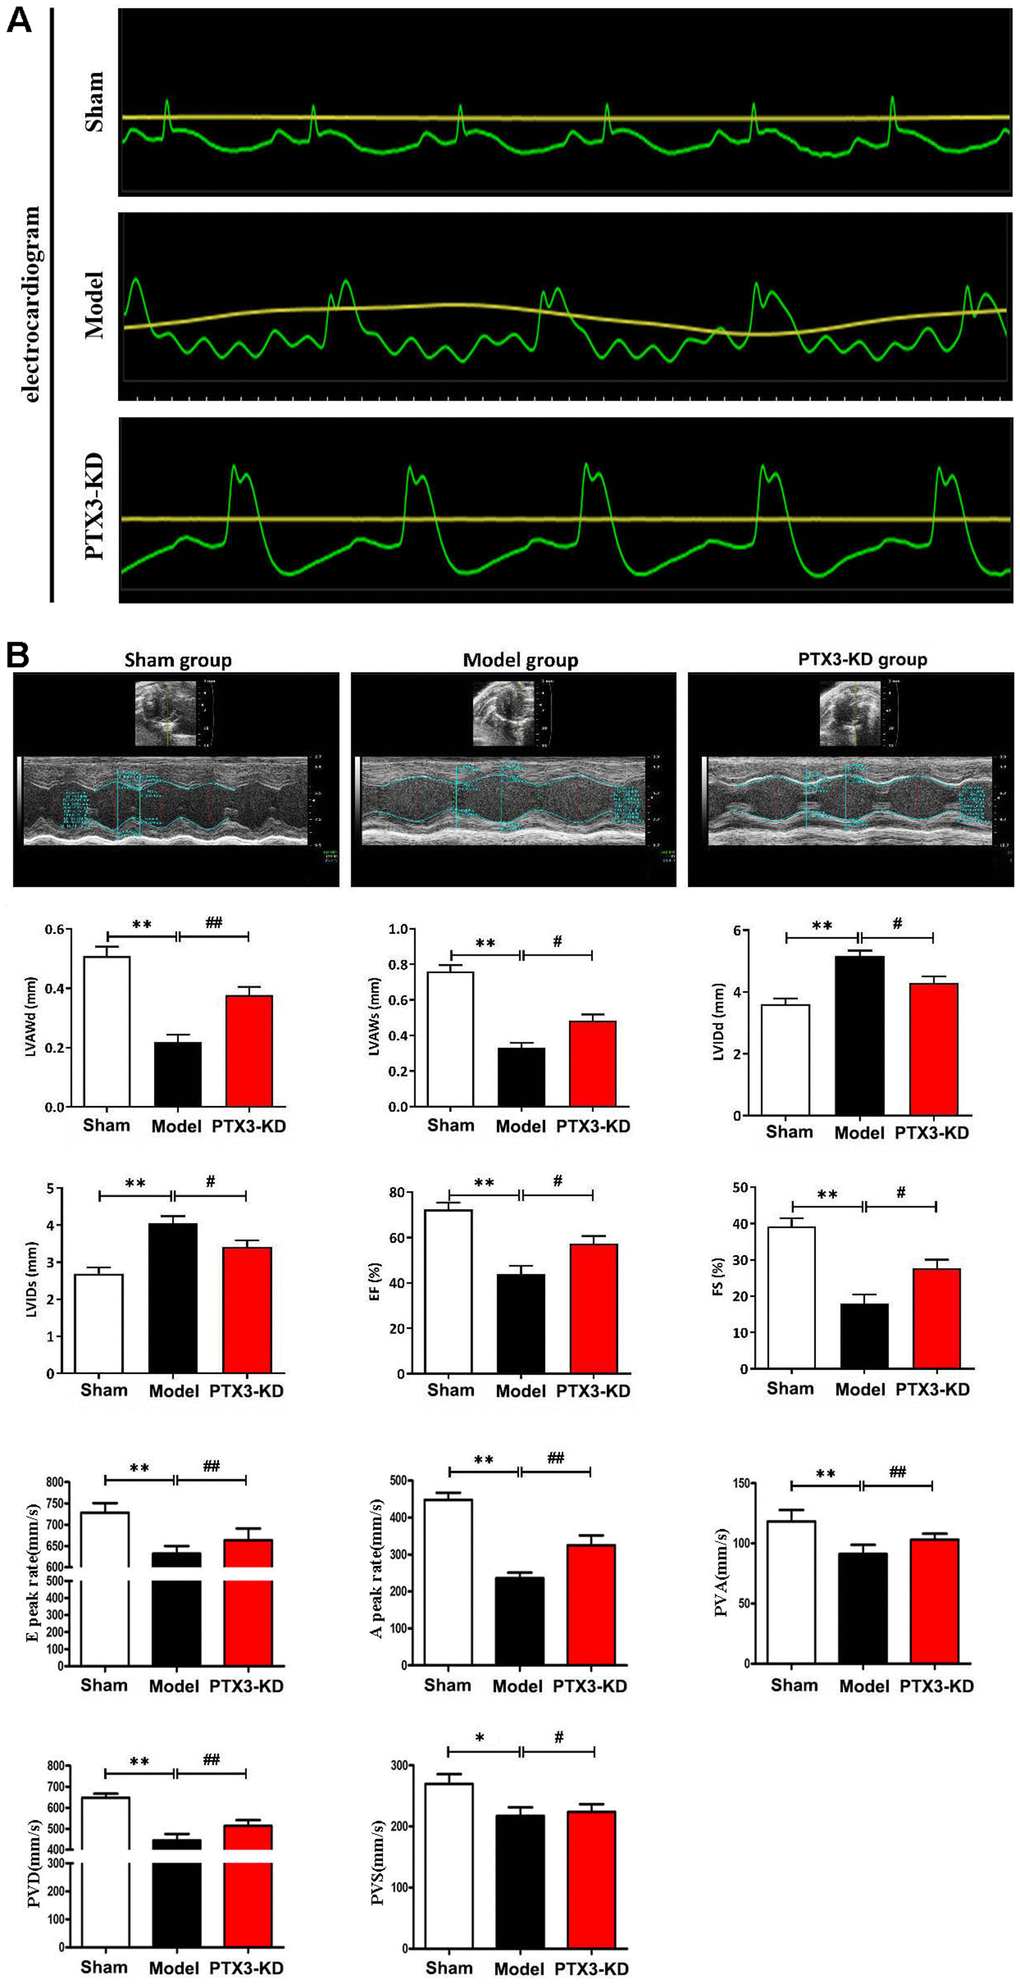 PTX3 KD improved the cardiac functions in murine HF after MI. (A) Electrocardiogram results confirmed that the animal model was successfully constructed. (B) Representative M-mode echocardiogram of LV in the parasternal short-axis view obtained from mice in each group. Echocardiographic parameters (LVAWd, LVAWs, LVIDd, LVIDs, ES and FS as well as E peak rate, A peak rate, PVA, PVD, PVS) at three cardiac cycles were recorded. LVAWd: left ventricular anterior wall thickness at end-diastolic; LVAWs: left ventricular anterior wall thickness at end-systolic; LVIDd: left ventricular internal diameter at end-diastolic; LVIDs: left ventricular internal diameter at end-systolic; EF: ejection fraction; FS: fraction shortening; PVD: Positive peak velocity of pulmonary vein in diastole; PVS: Peak systolic velocity of pulmonary vein; PVA: Negative peak velocity of pulmonary vein during atrial contraction. Control group vs. PTX3-NC group, *pp#p##p